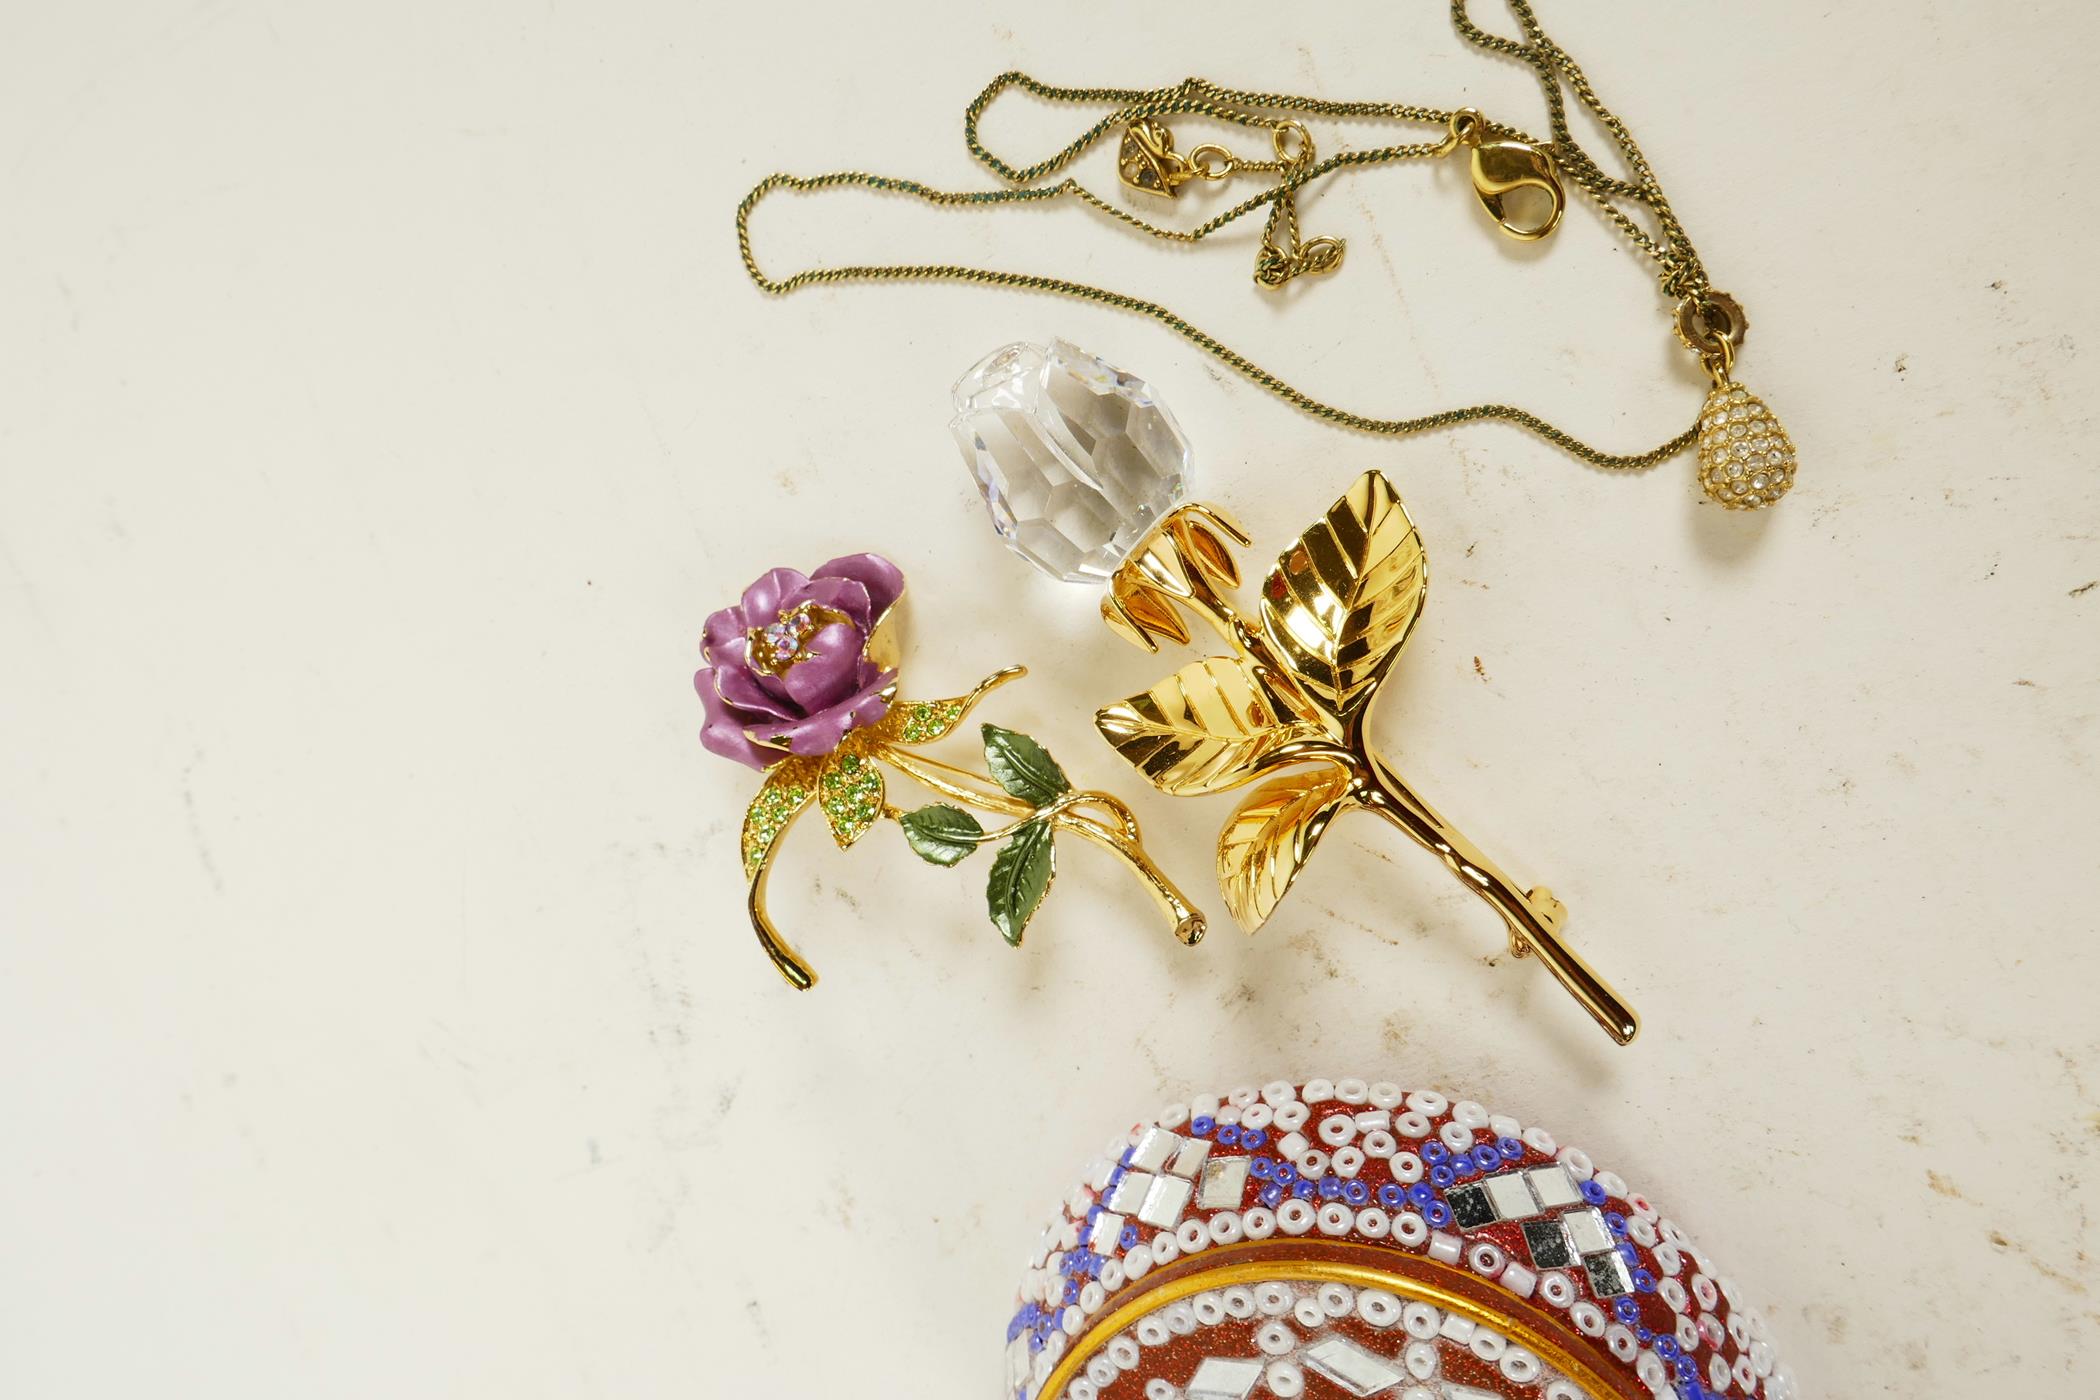 Two Swarovski 'Rose' crystal and gilt flower brooches, a Swarovski pendant, and a micro-mosaic - Image 4 of 5